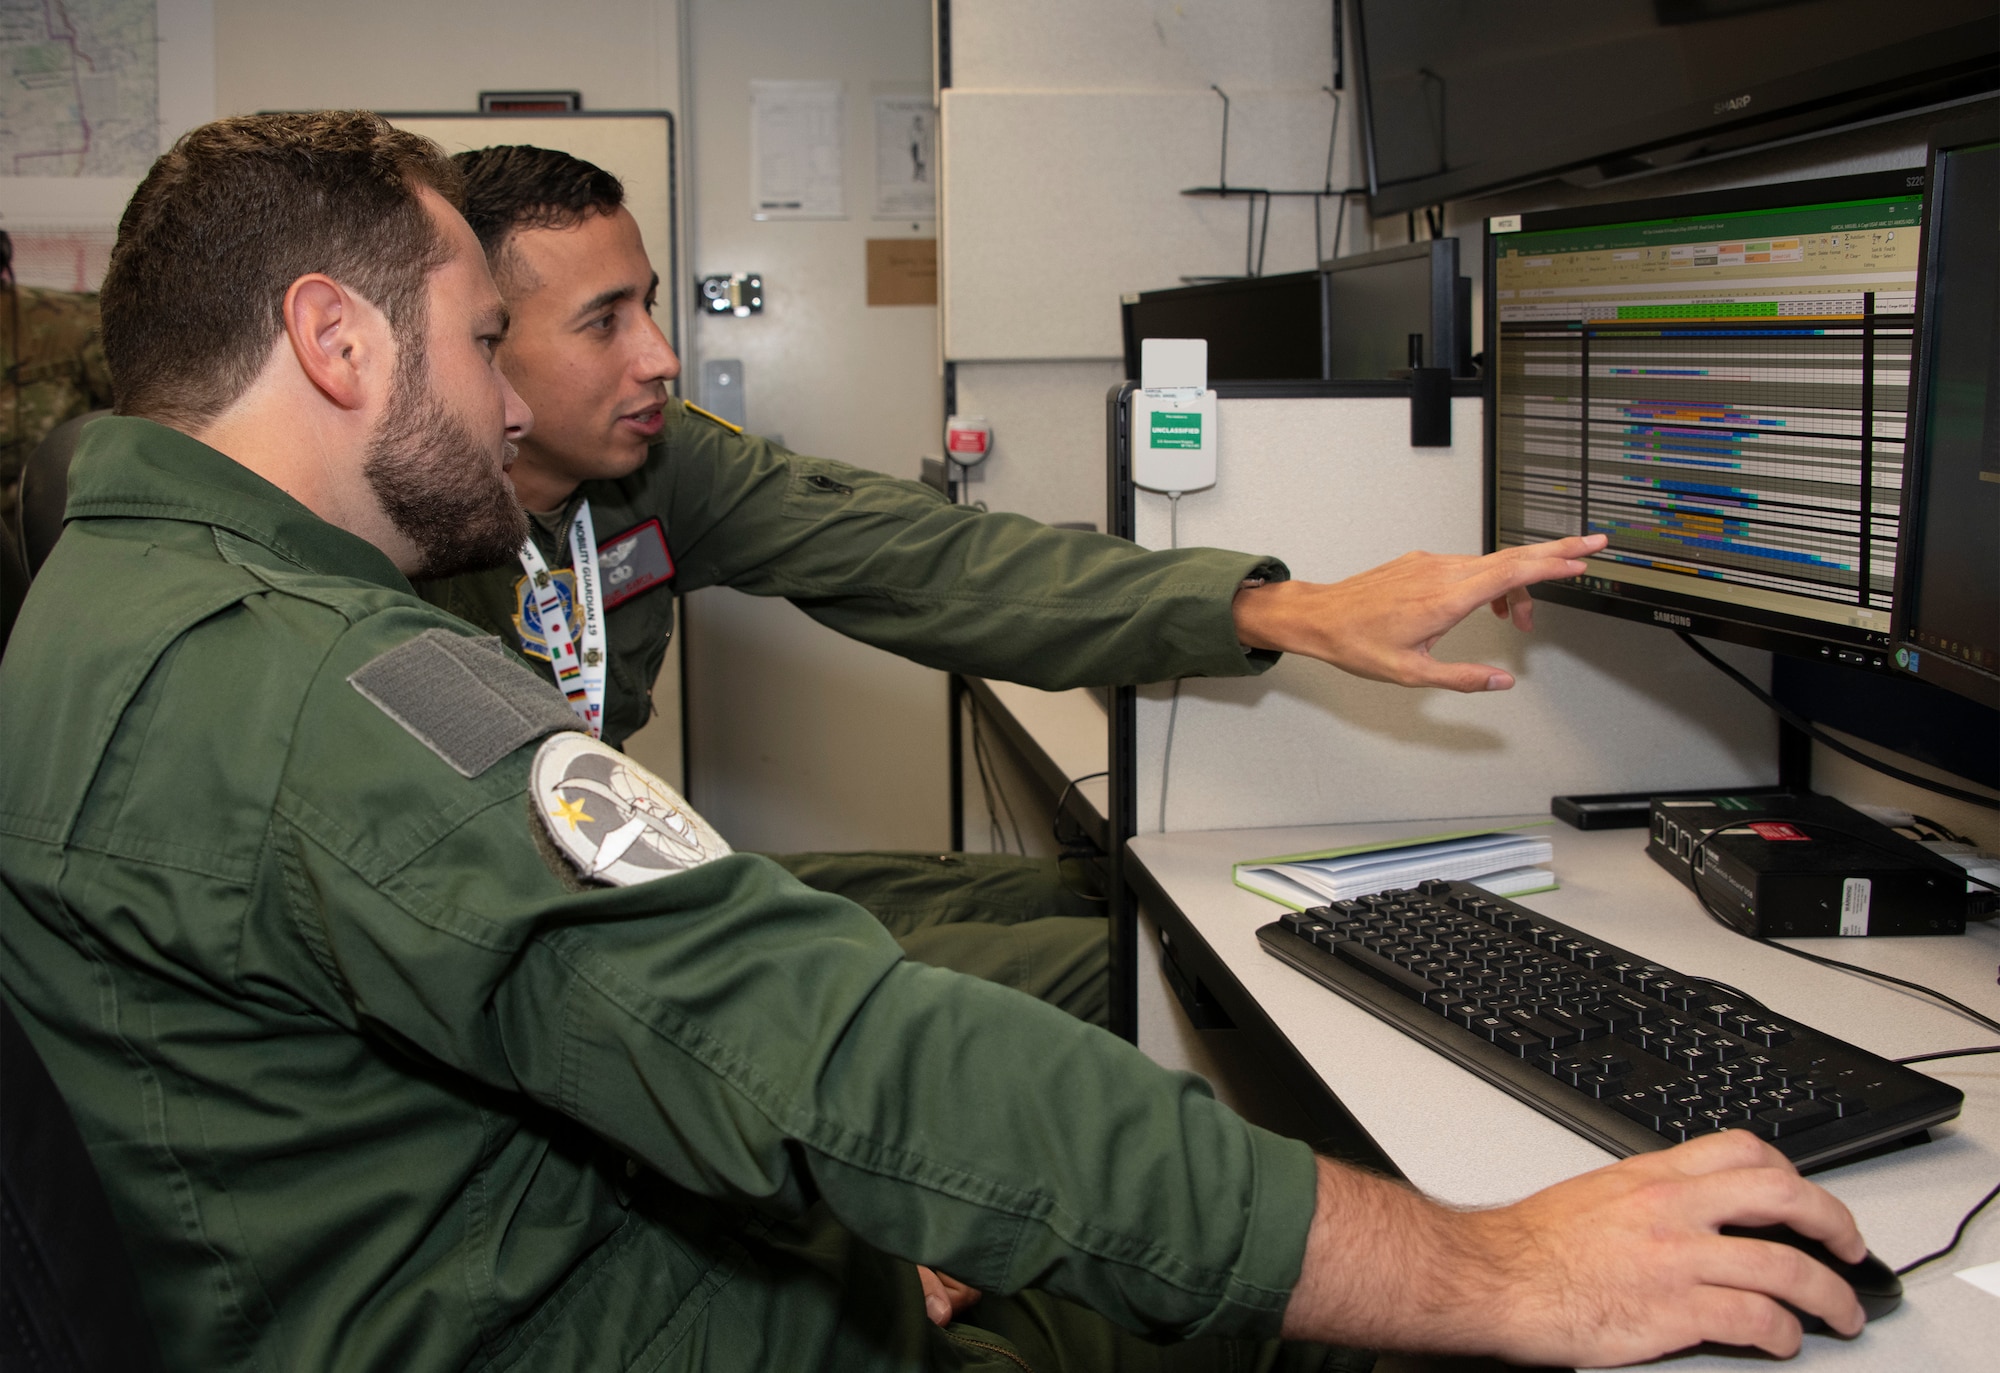 French Air Force Lt. Rodelphe Barberot, left, Escadron de transport 2/61 Franche-Comté, and U.S. Air Force Capt. Miguel Garcia, center, 321st Air Mobility Operations Squadron assistant operations officer, study data files at the Weapons Systems Suite in the Air Operations Center during exercise Mobility Guardian Sept. 25, 2019, at Travis Air Force Base, California. MG19 is Air Mobility Command’s flagship exercise for large-scale, rapid global mobility operations. Forty-six U.S. aircraft joined aircraft from 29 international partners, along with more than 4,000 U.S. and international Air Force, Army, Navy and Marine Corps aviators. (Photo altered for security reasons)  (U.S. Air Force photo illustration by Heide Couch)